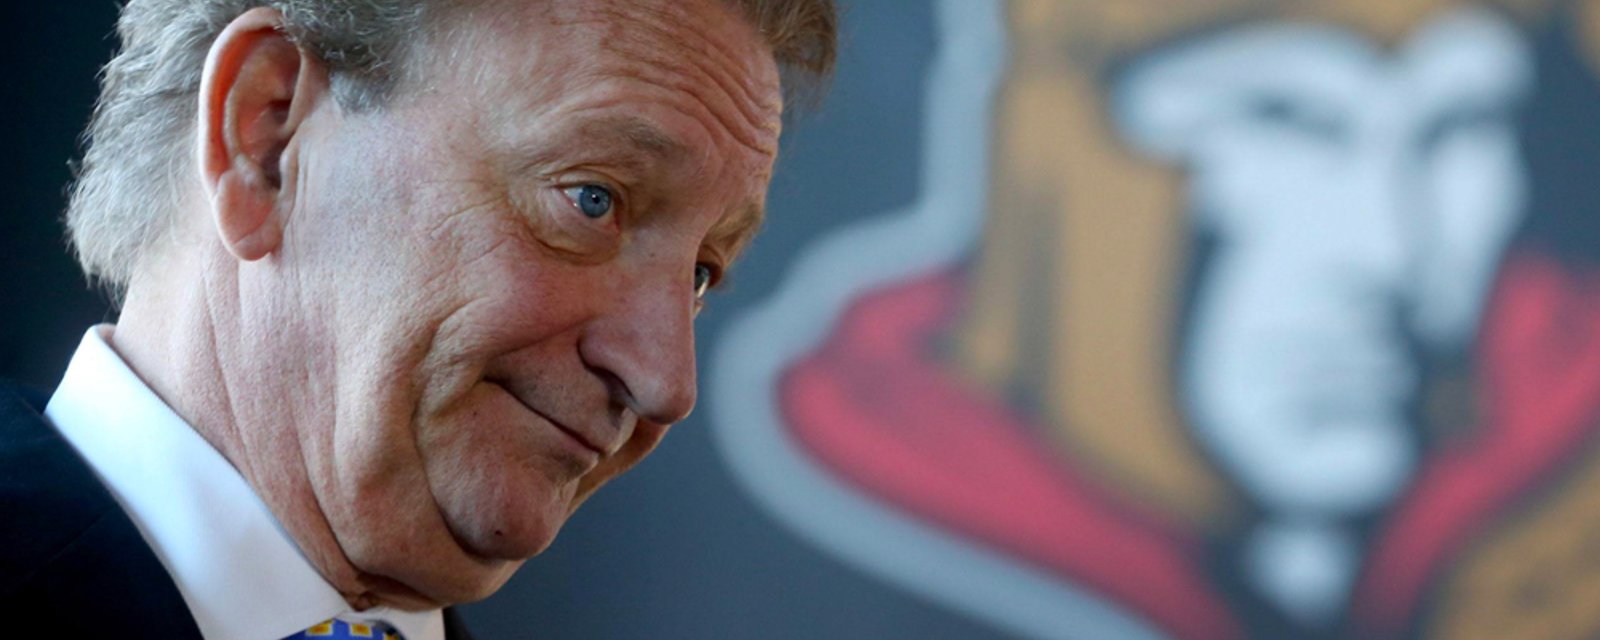 Melnyk lashes out against Sens fans in bizarre rant